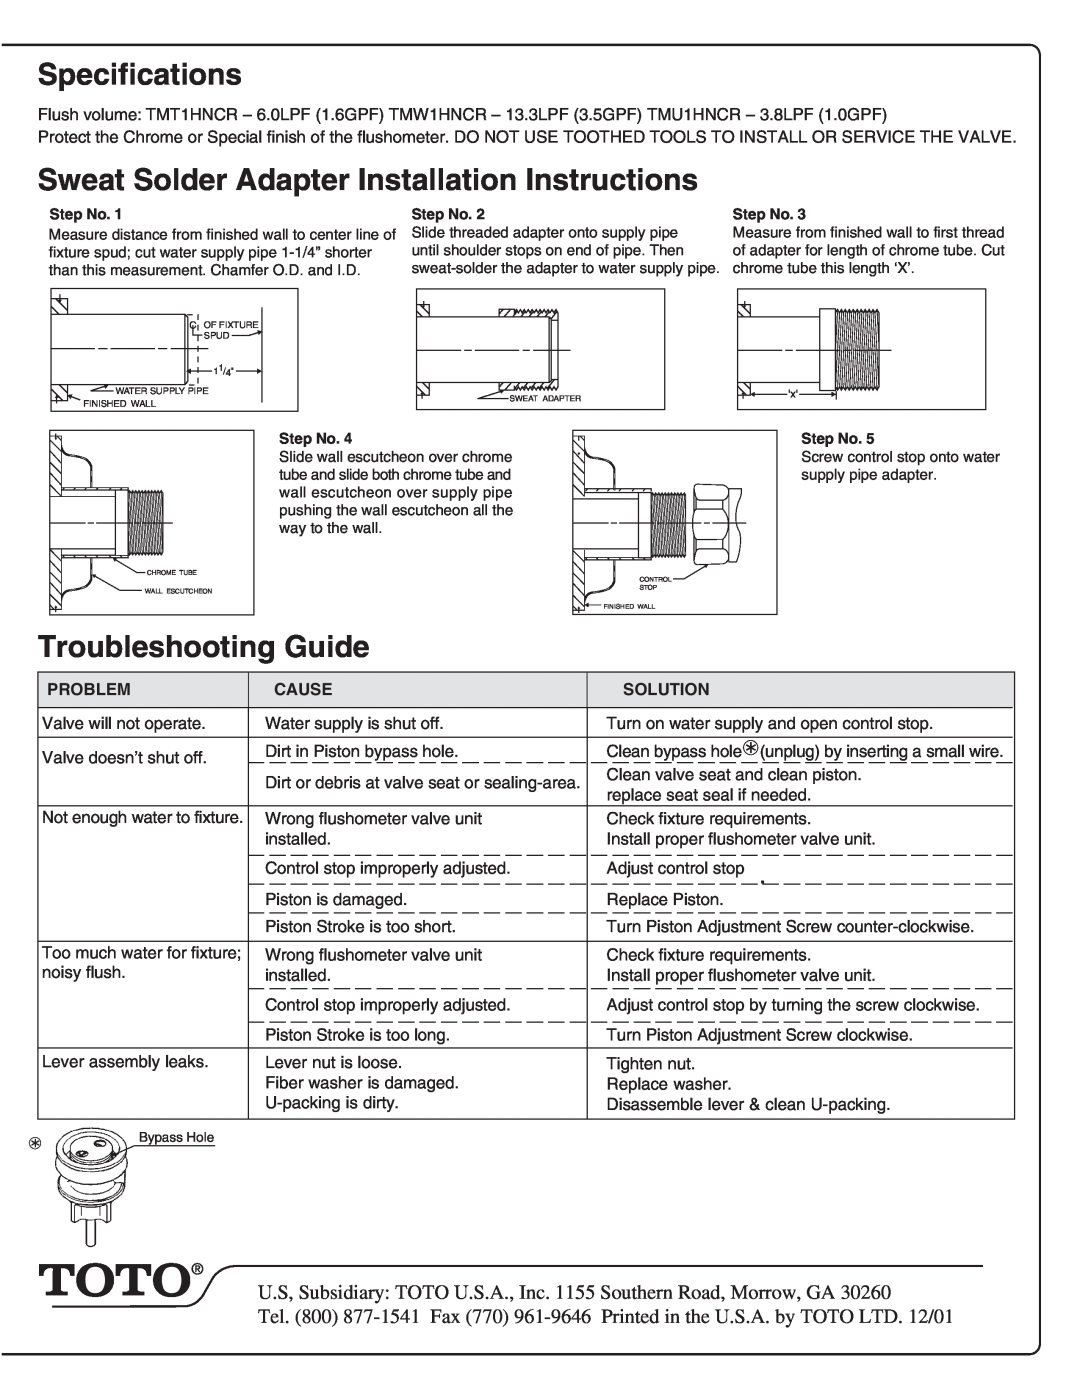 Toto TMT1HNCR Specifications, Sweat Solder Adapter Installation Instructions, Troubleshooting Guide, Problem, Cause 